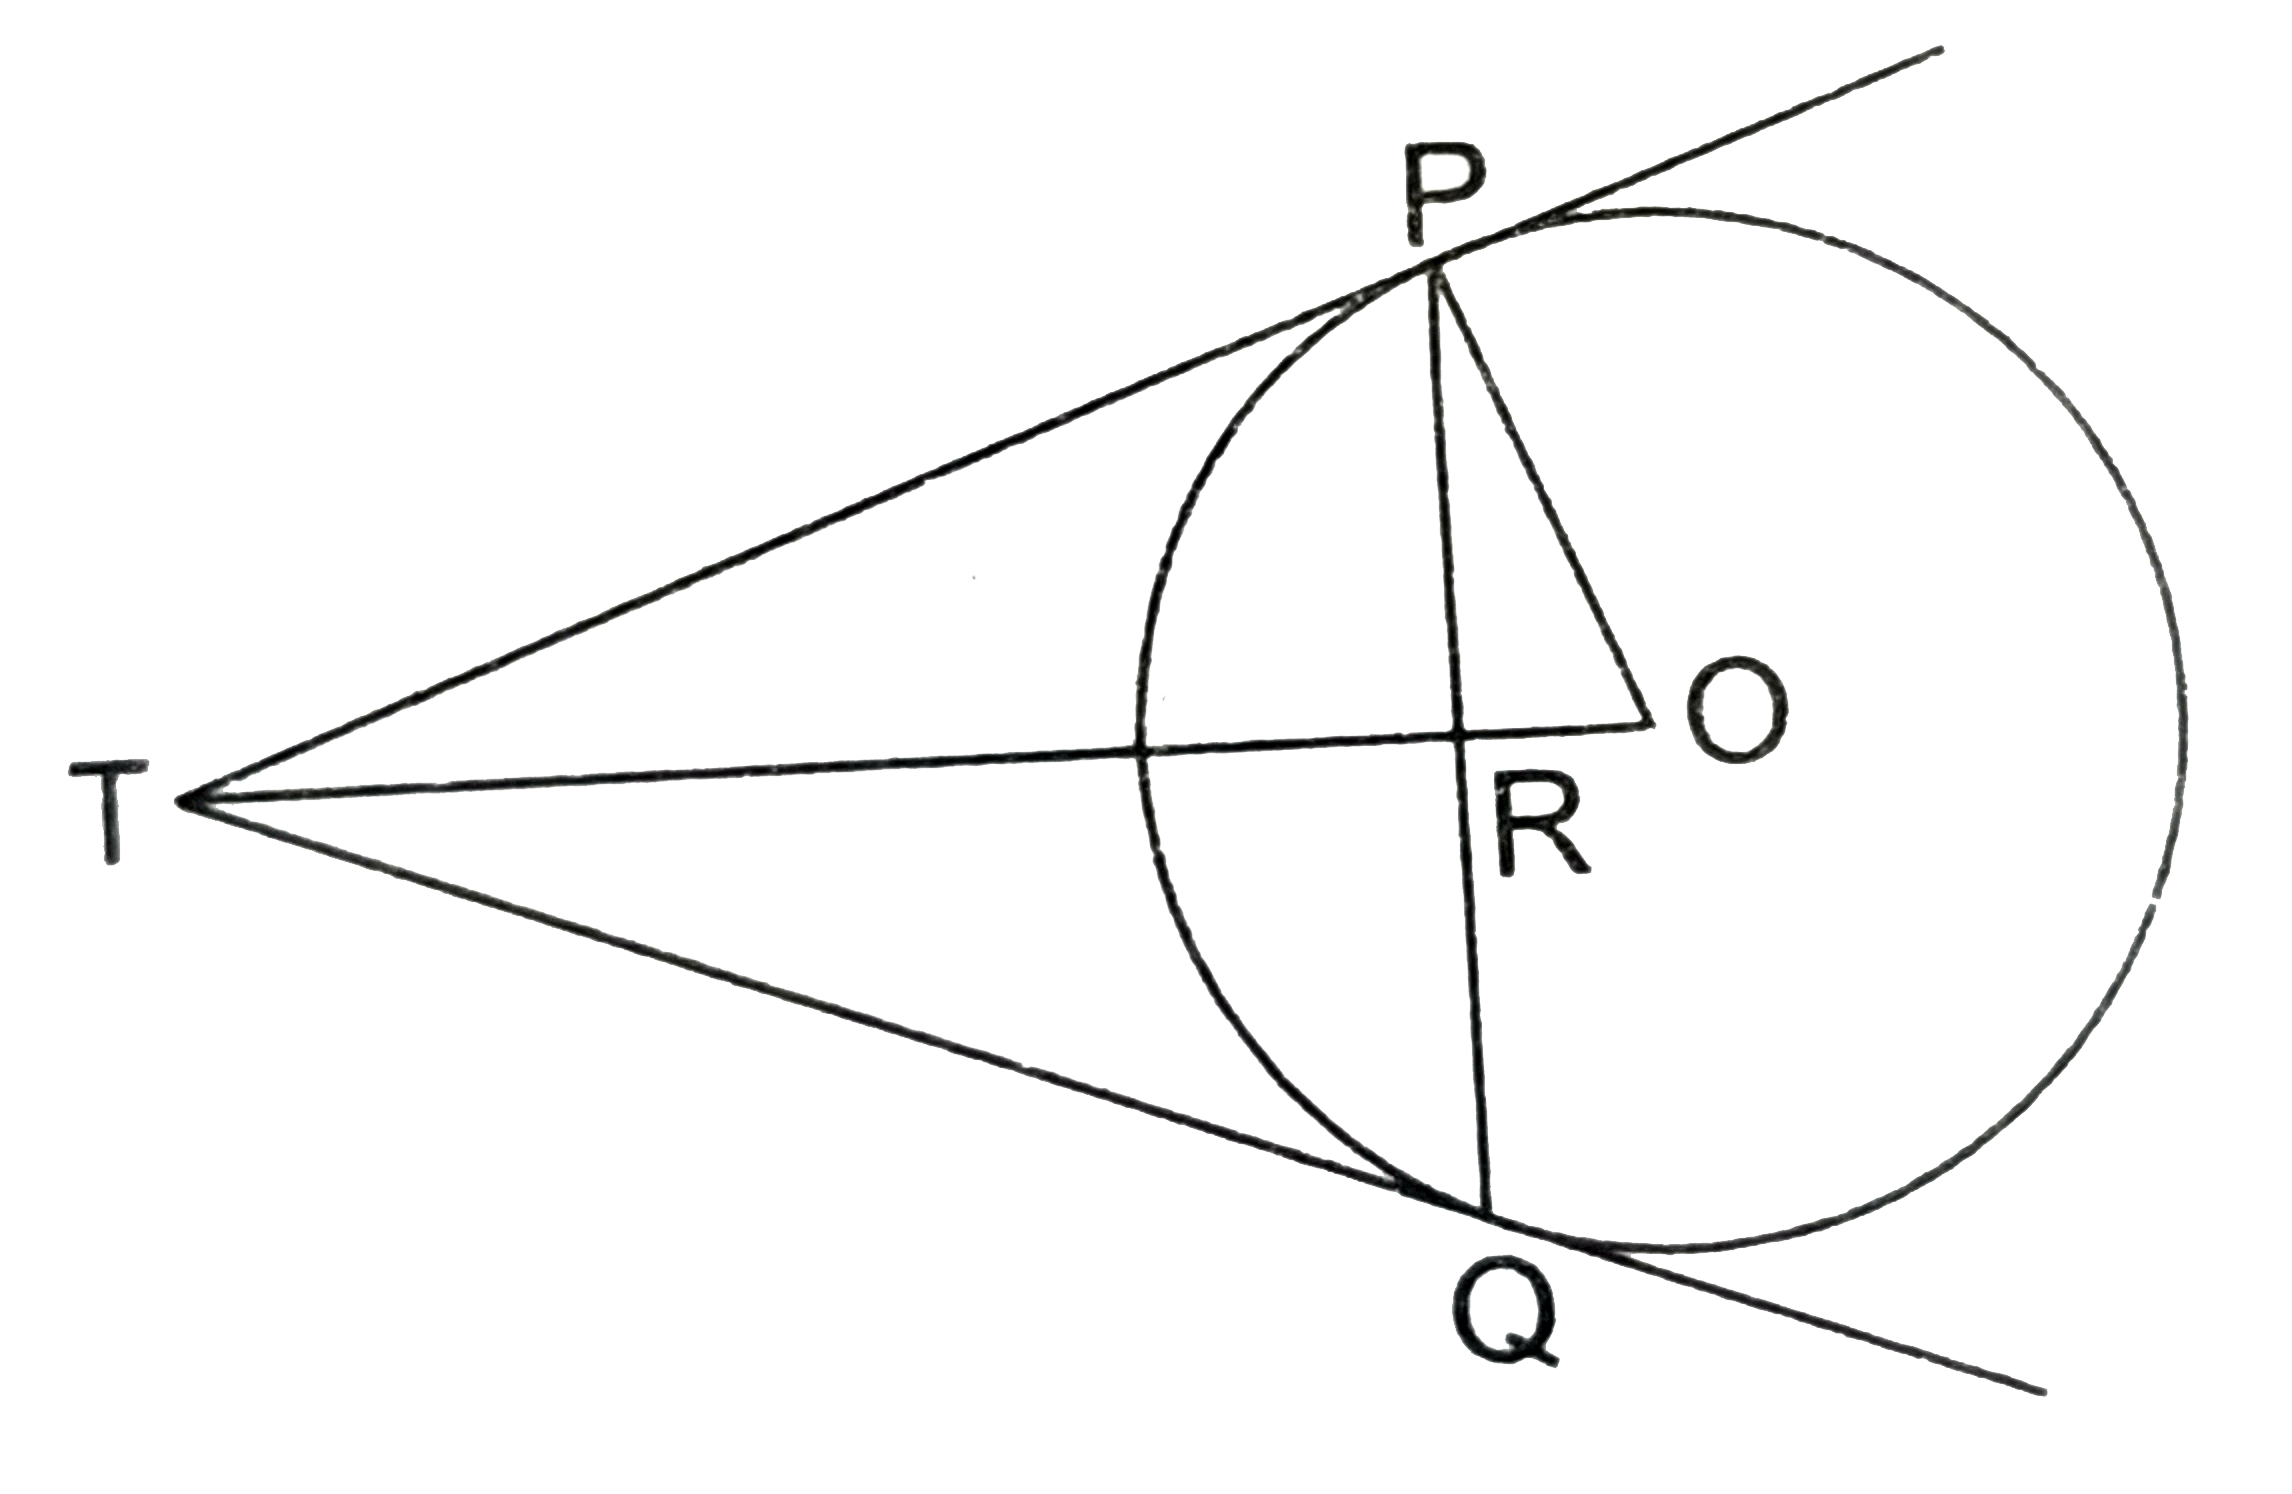 PQ is a chord of length 16cm of a circle of radius 10cm. The tangents at P and Q intersect at a point T as shown in the figure. Find the length of TP.